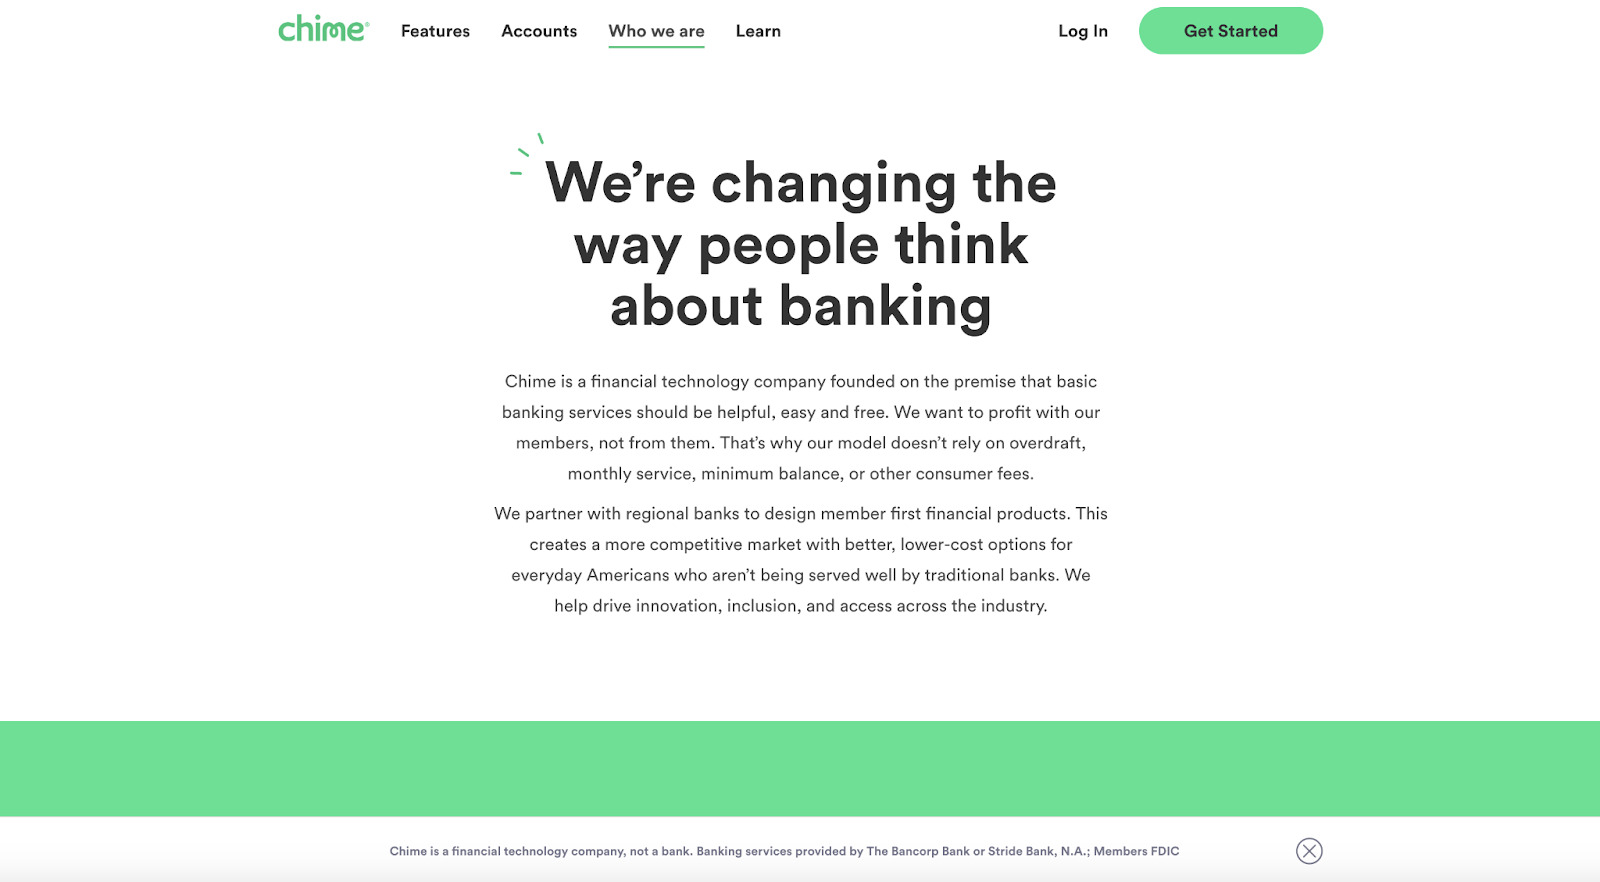 Chime uses black text with a splash of green to make its About Us page pop.